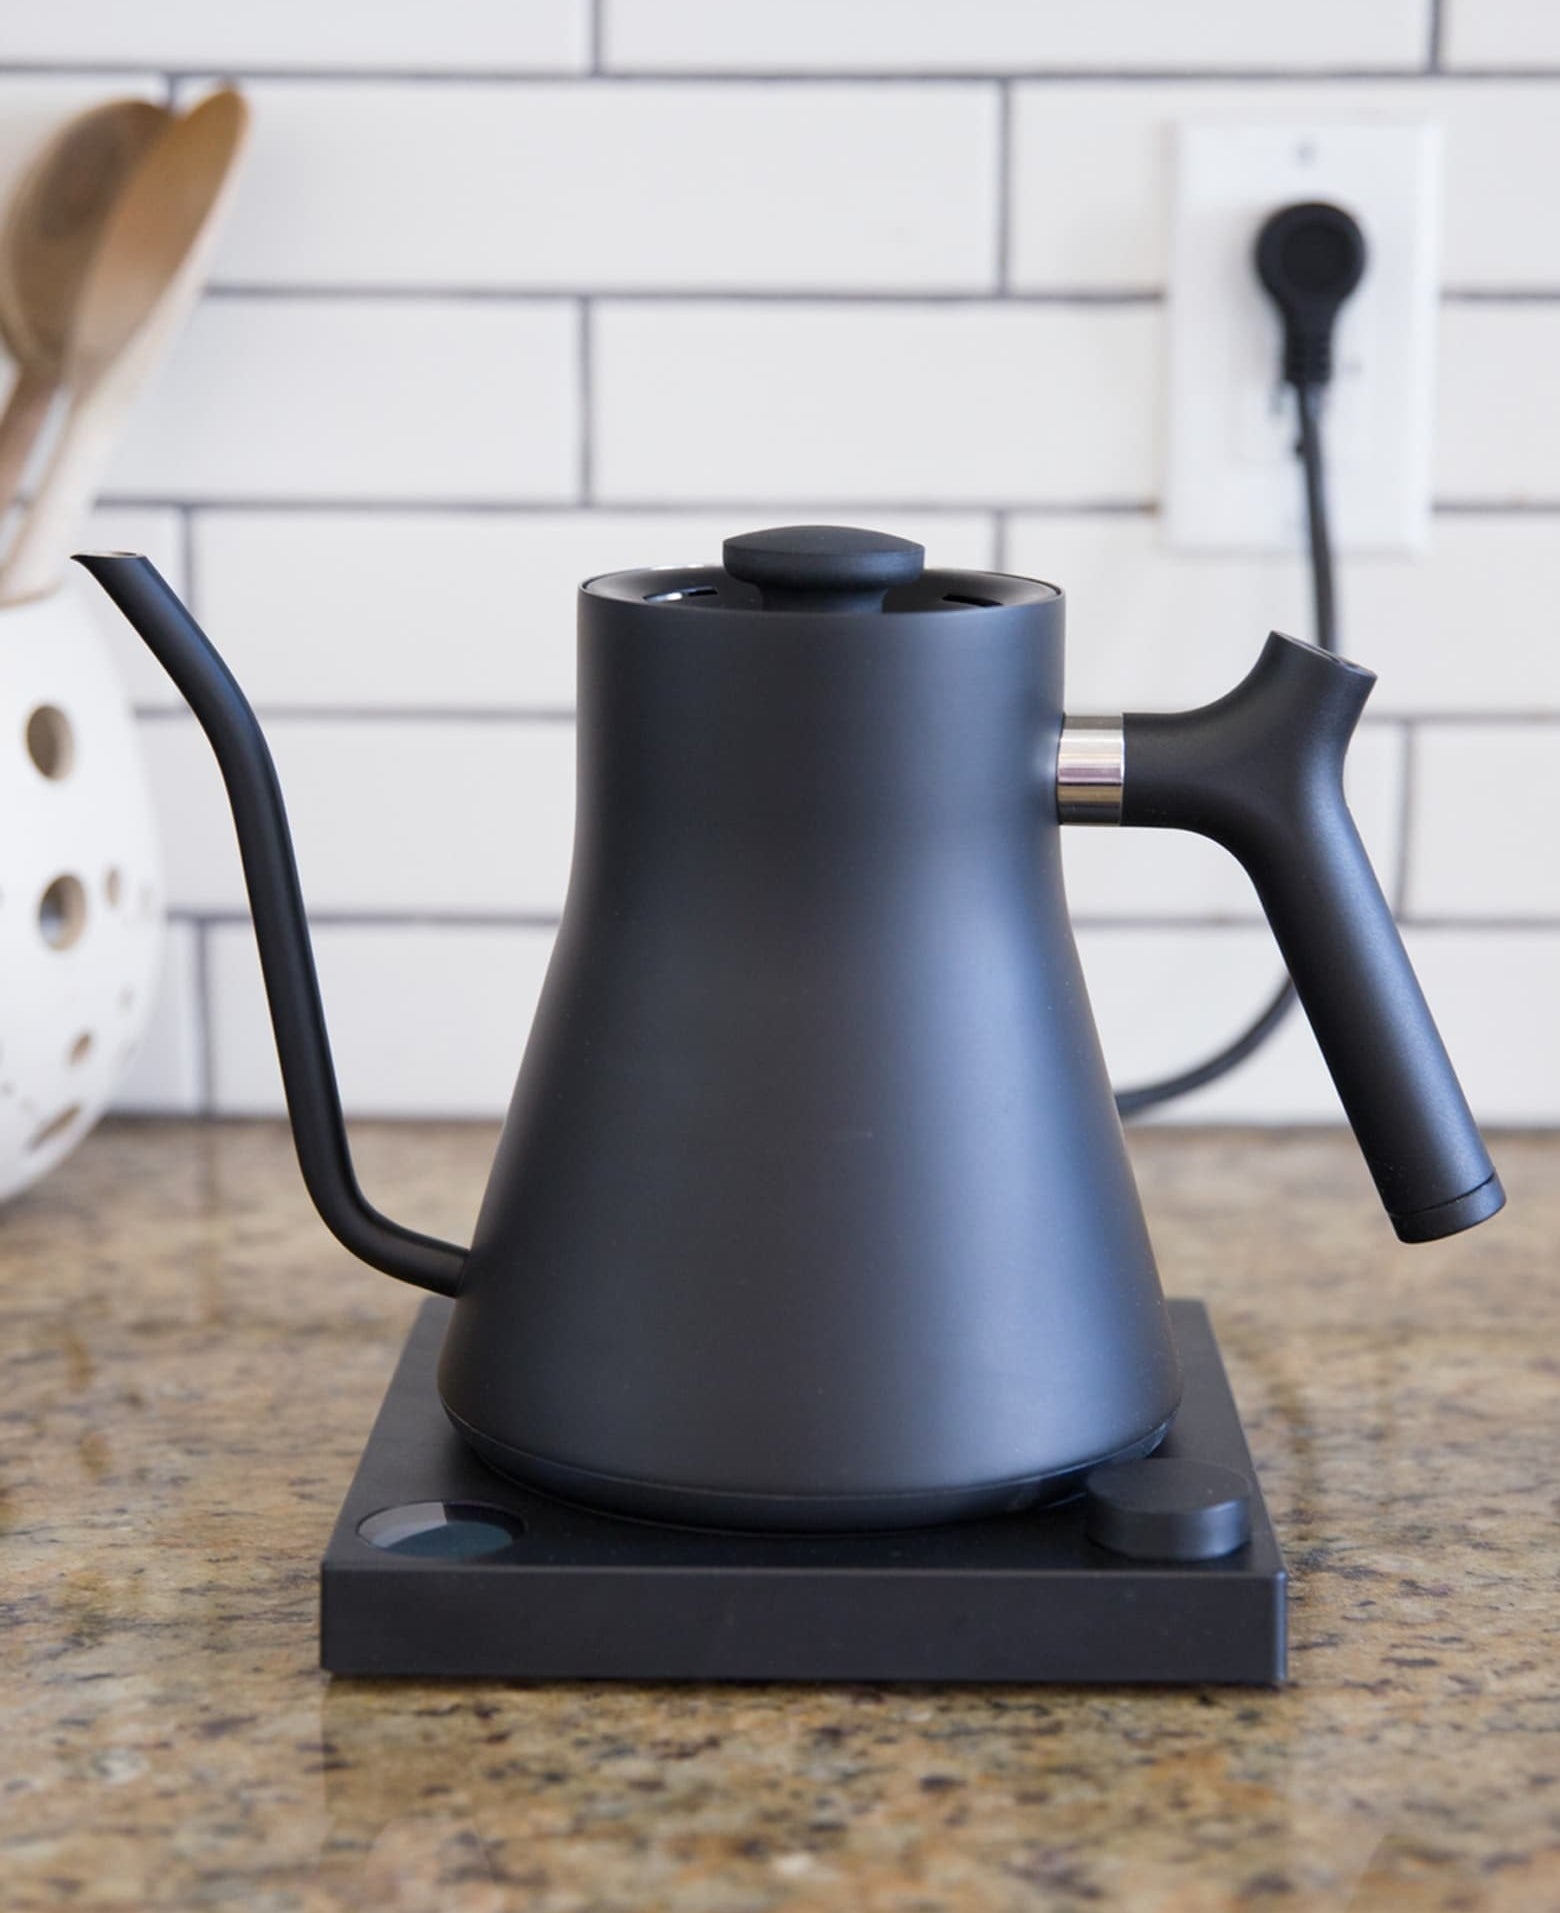 The black matte kettle with matching base